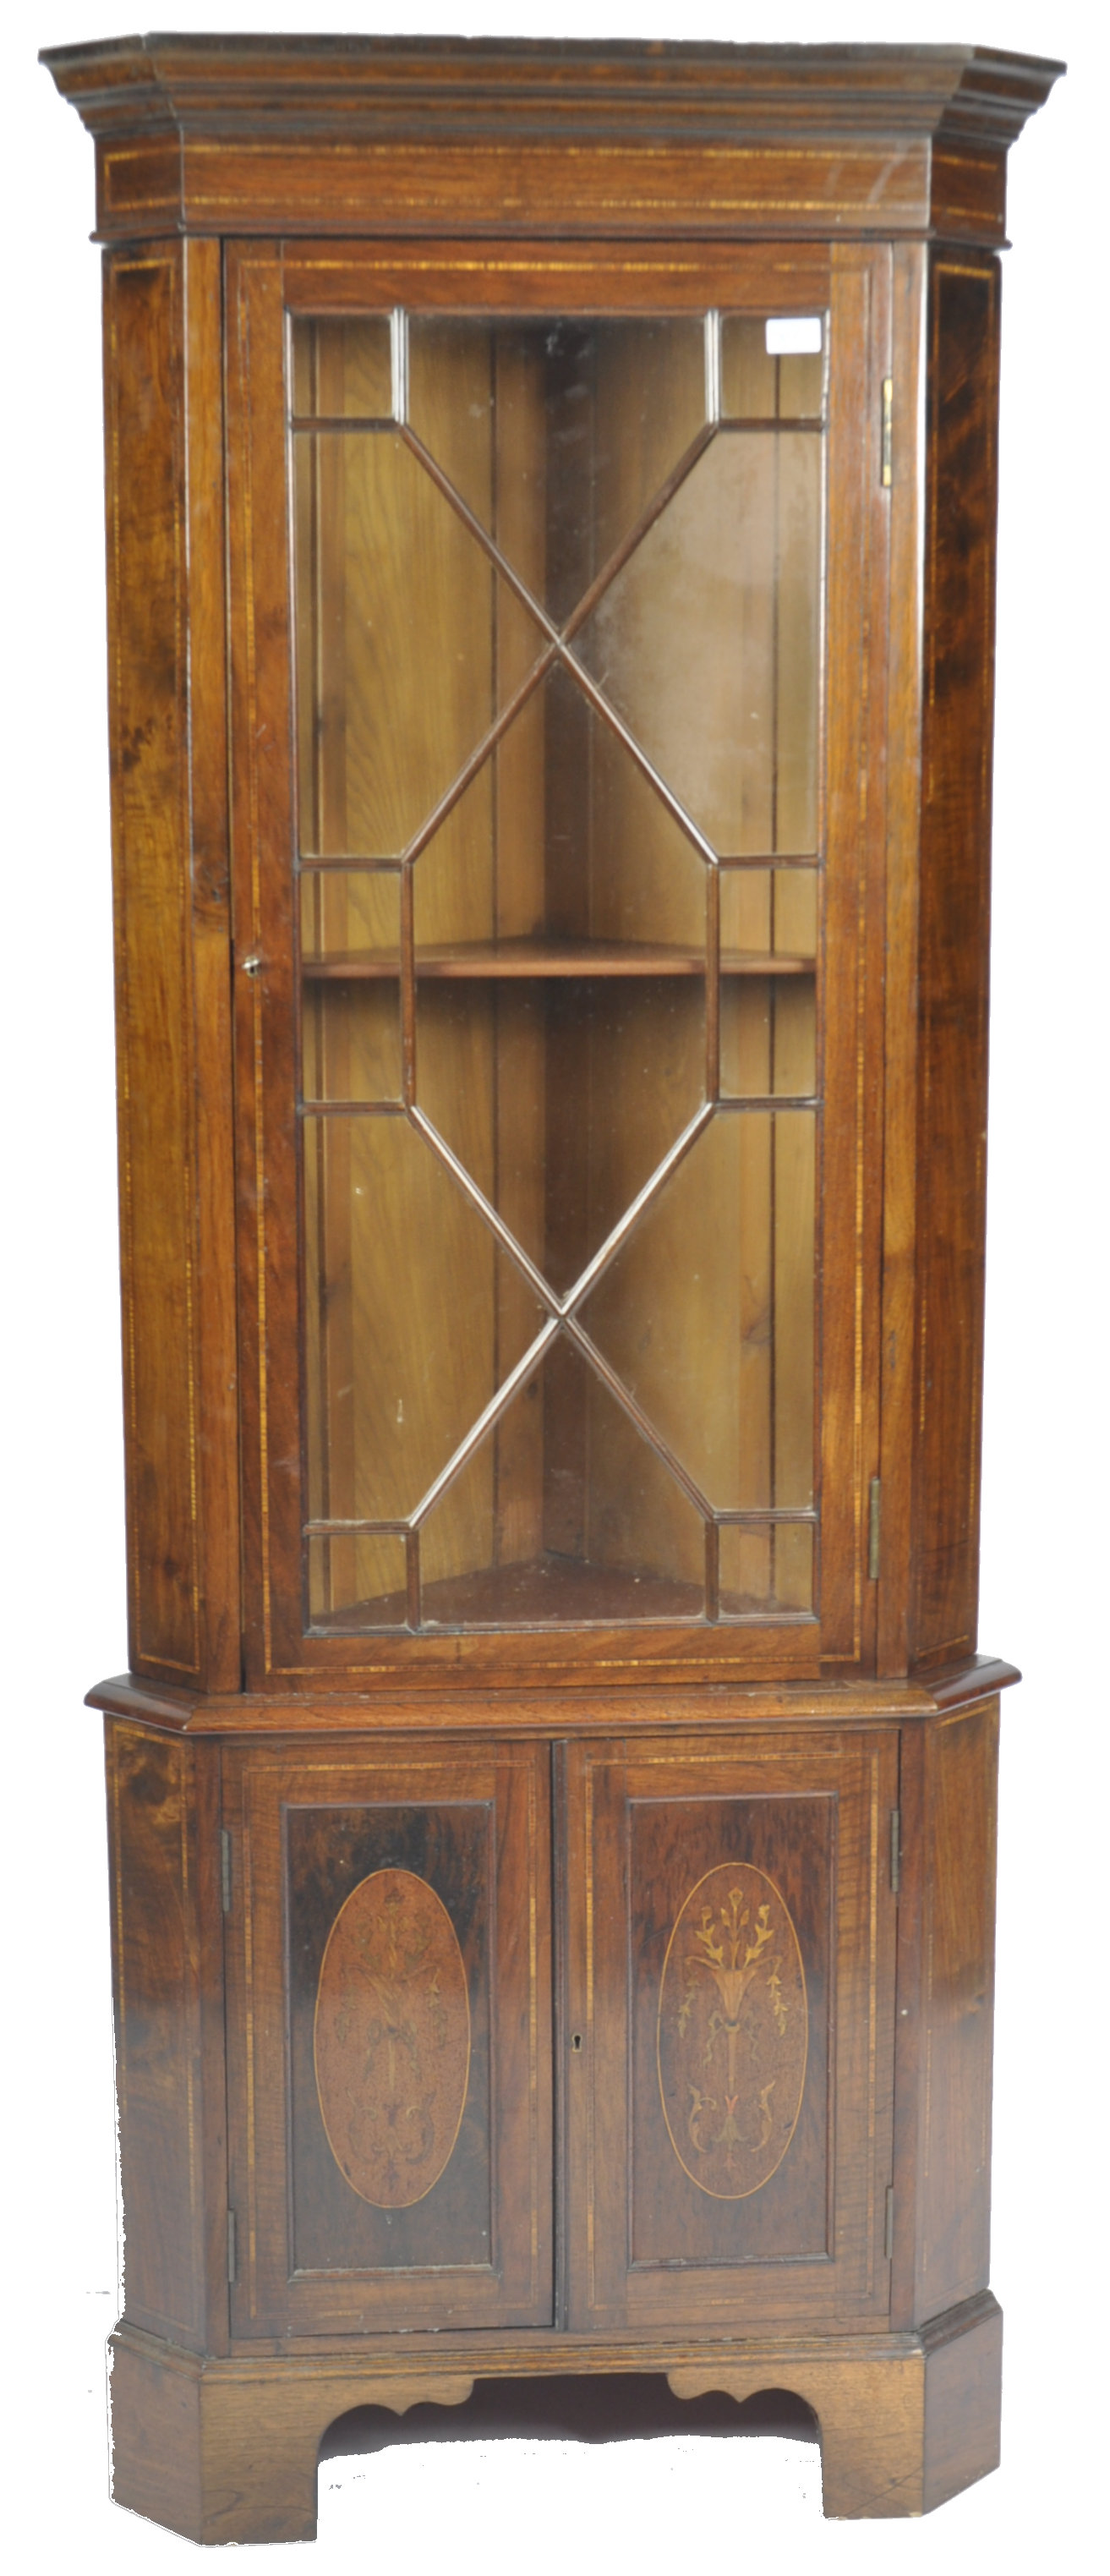 EDWARDIAN MARQUETRY INLAID ROSEWOOD CORNER CABINET